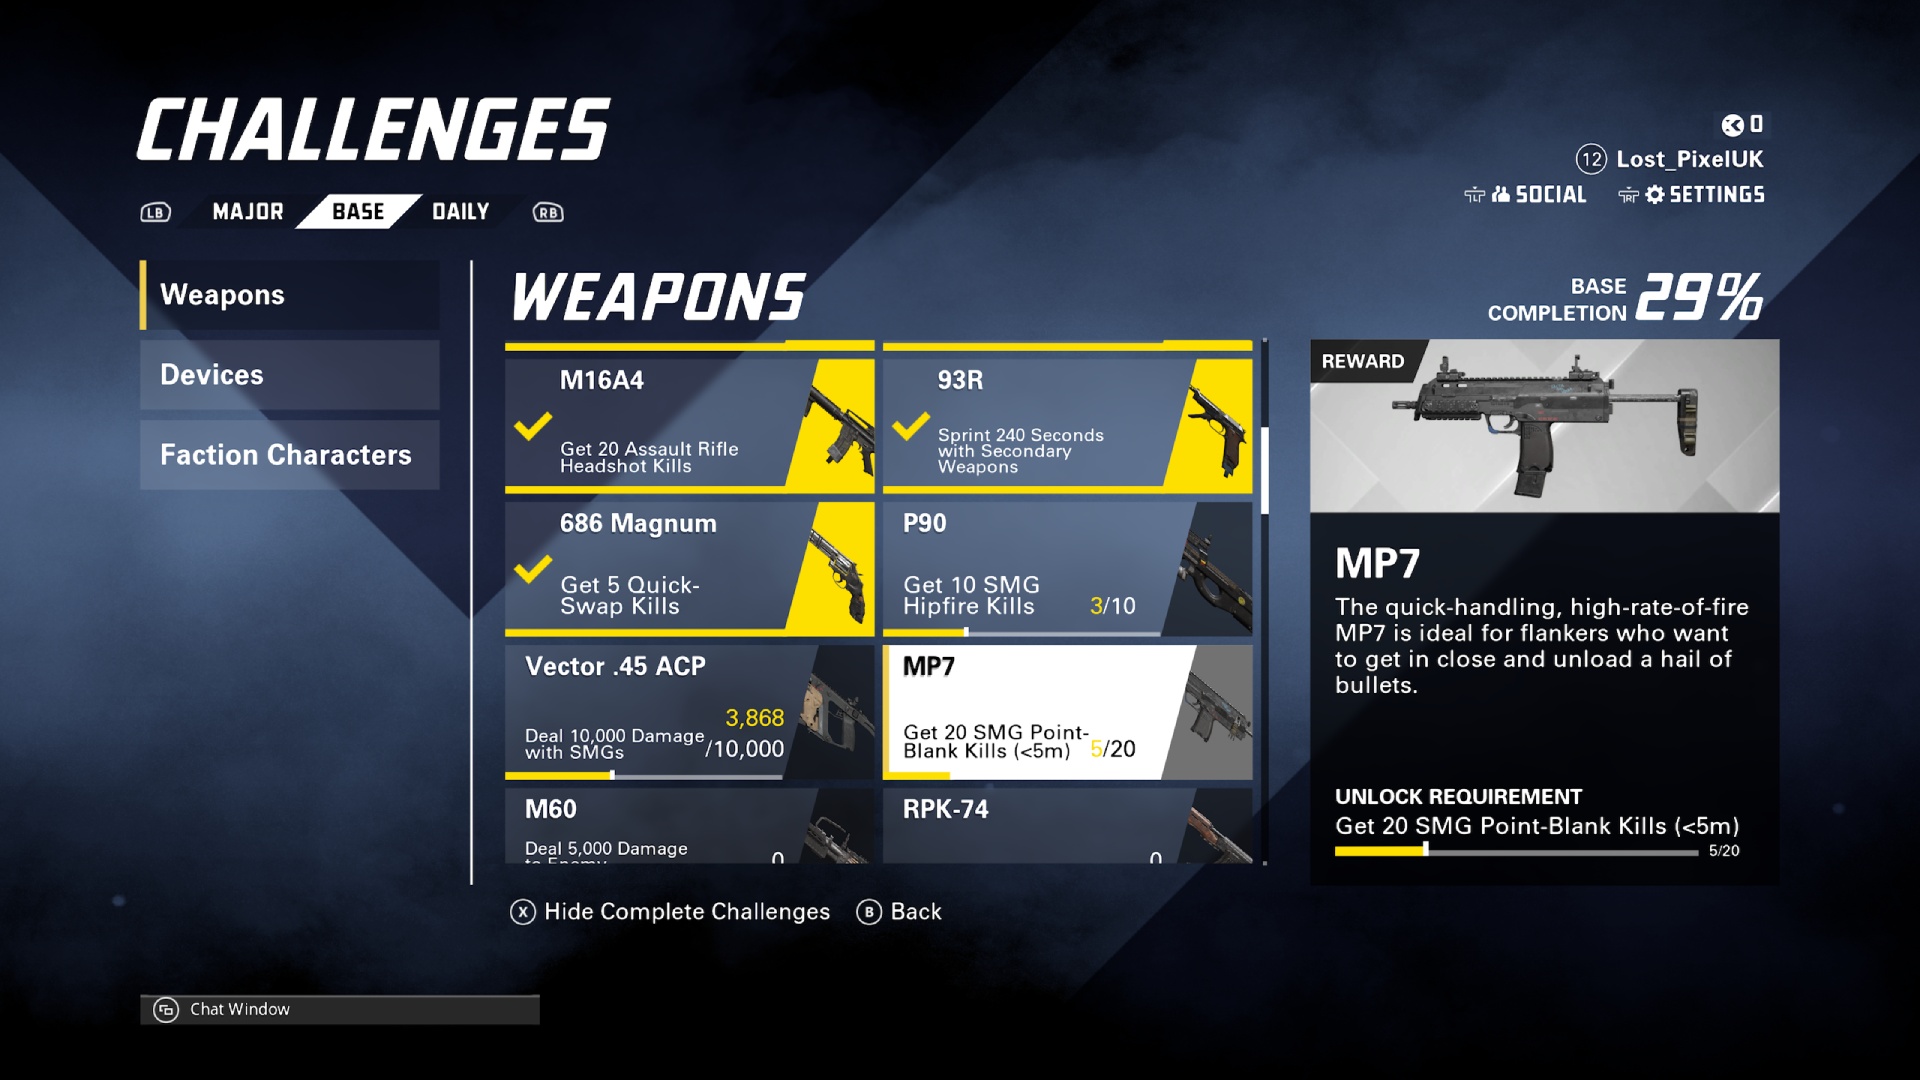 The MP7 challenge in XDefiant